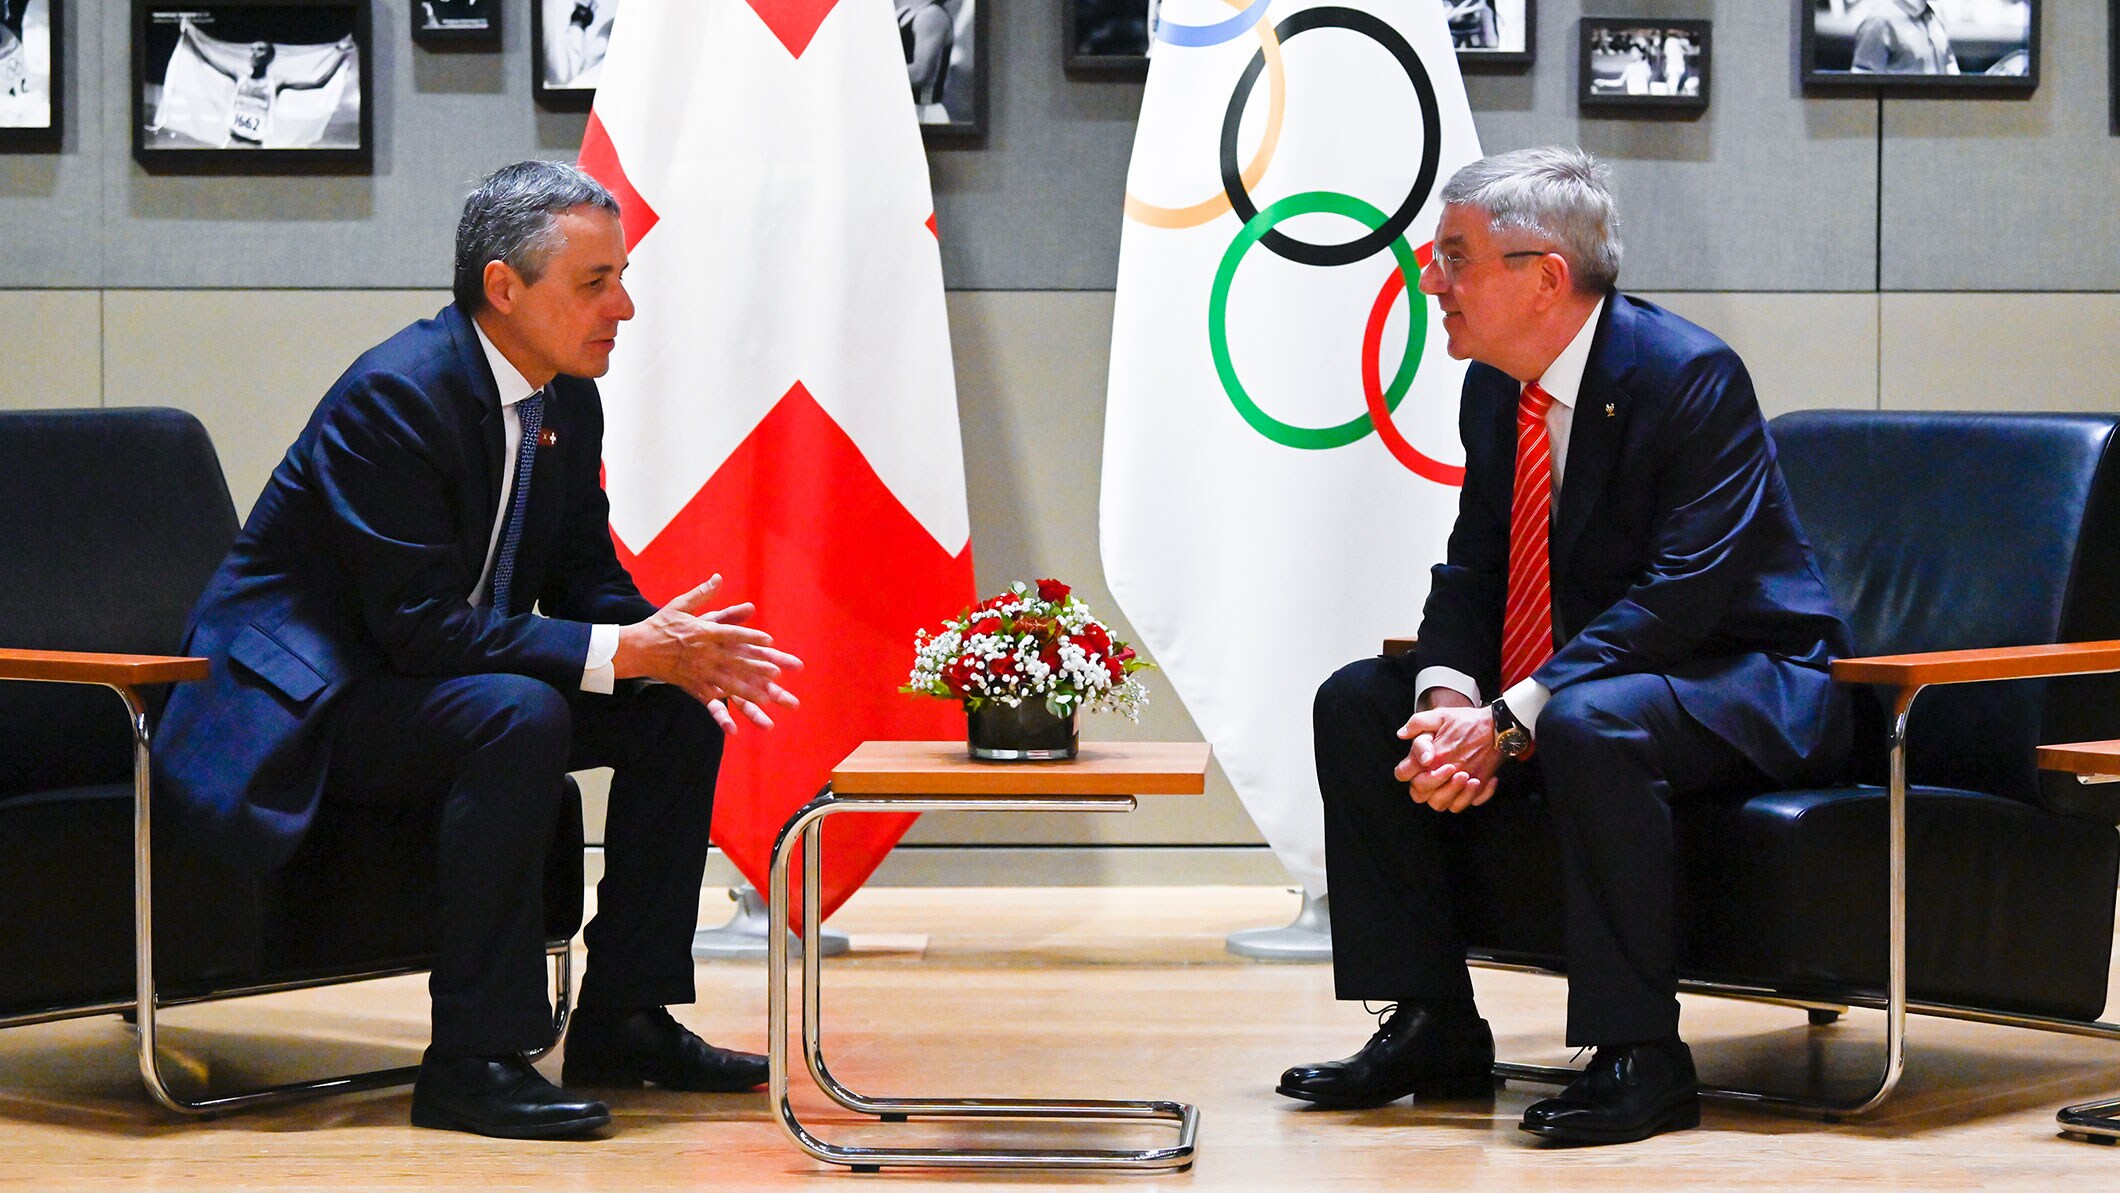 IOC President Thomas Bach welcomed the President of the Swiss Confederation, Ignazio Cassis, on the occasion of the Swiss National Day celebrations.  